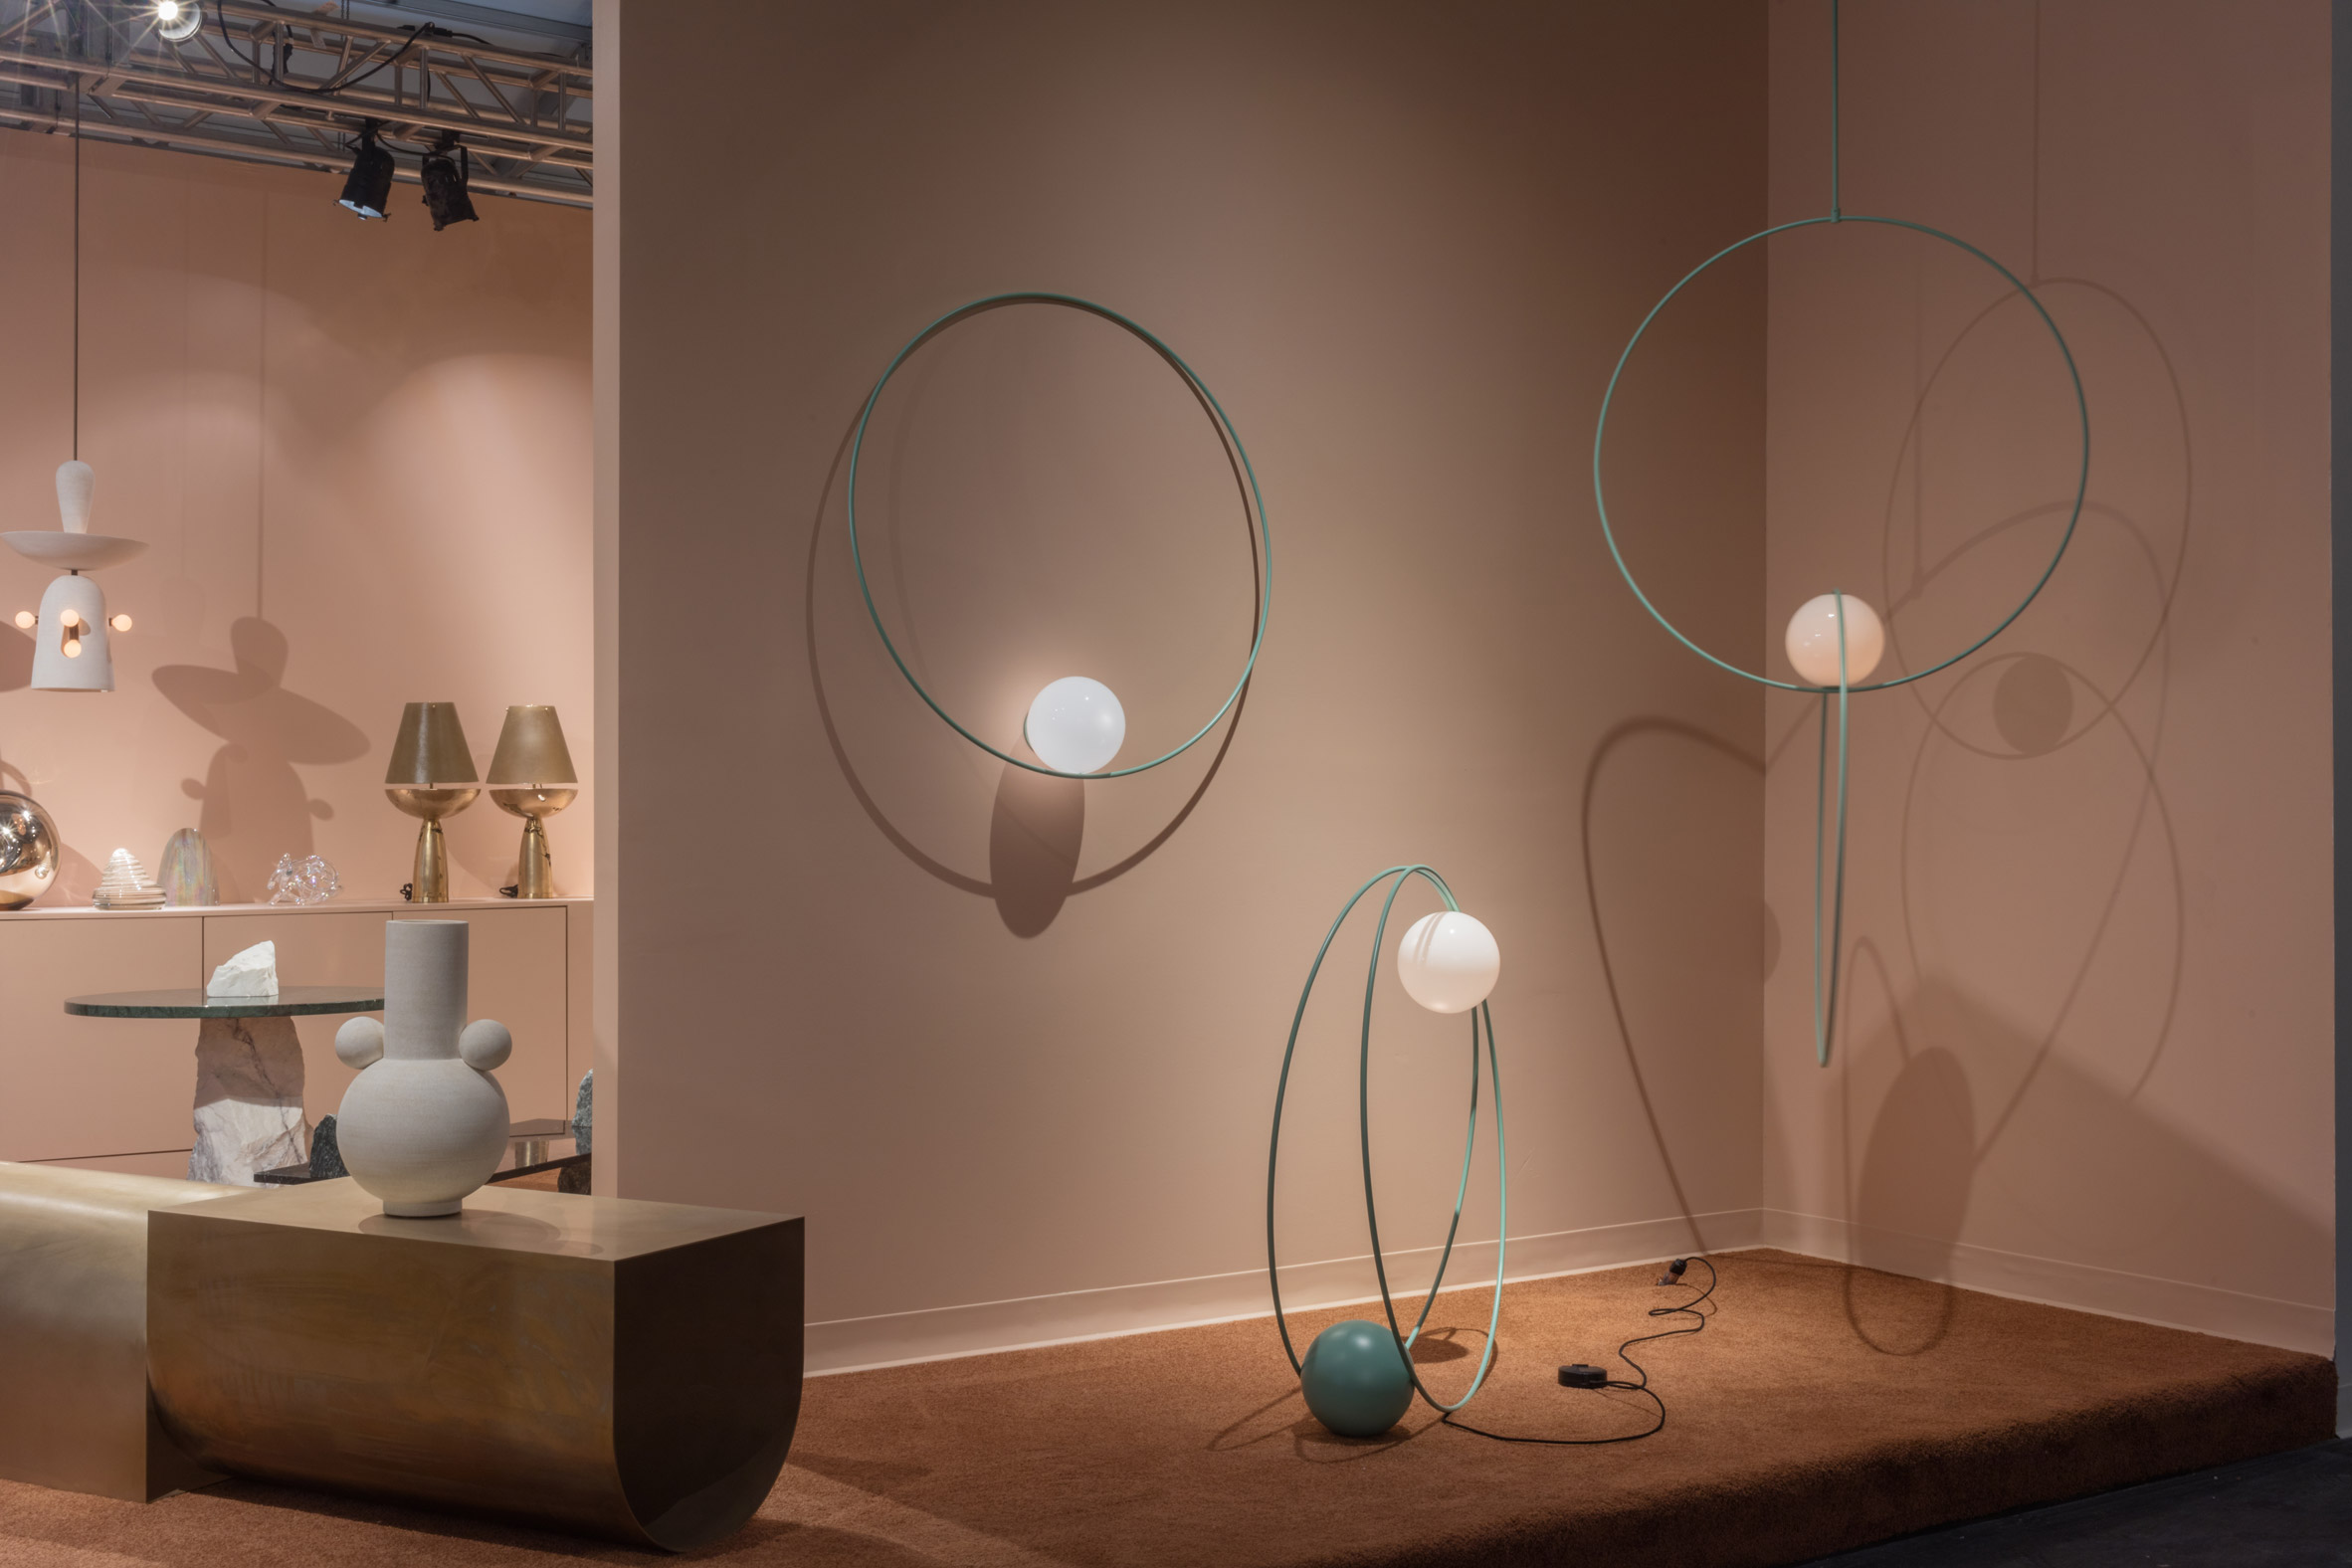 bespoke-loop-collection-by-michael-anastassiades-at-future-perfect-miami-design-lighting-_dezeen_2364_col_8